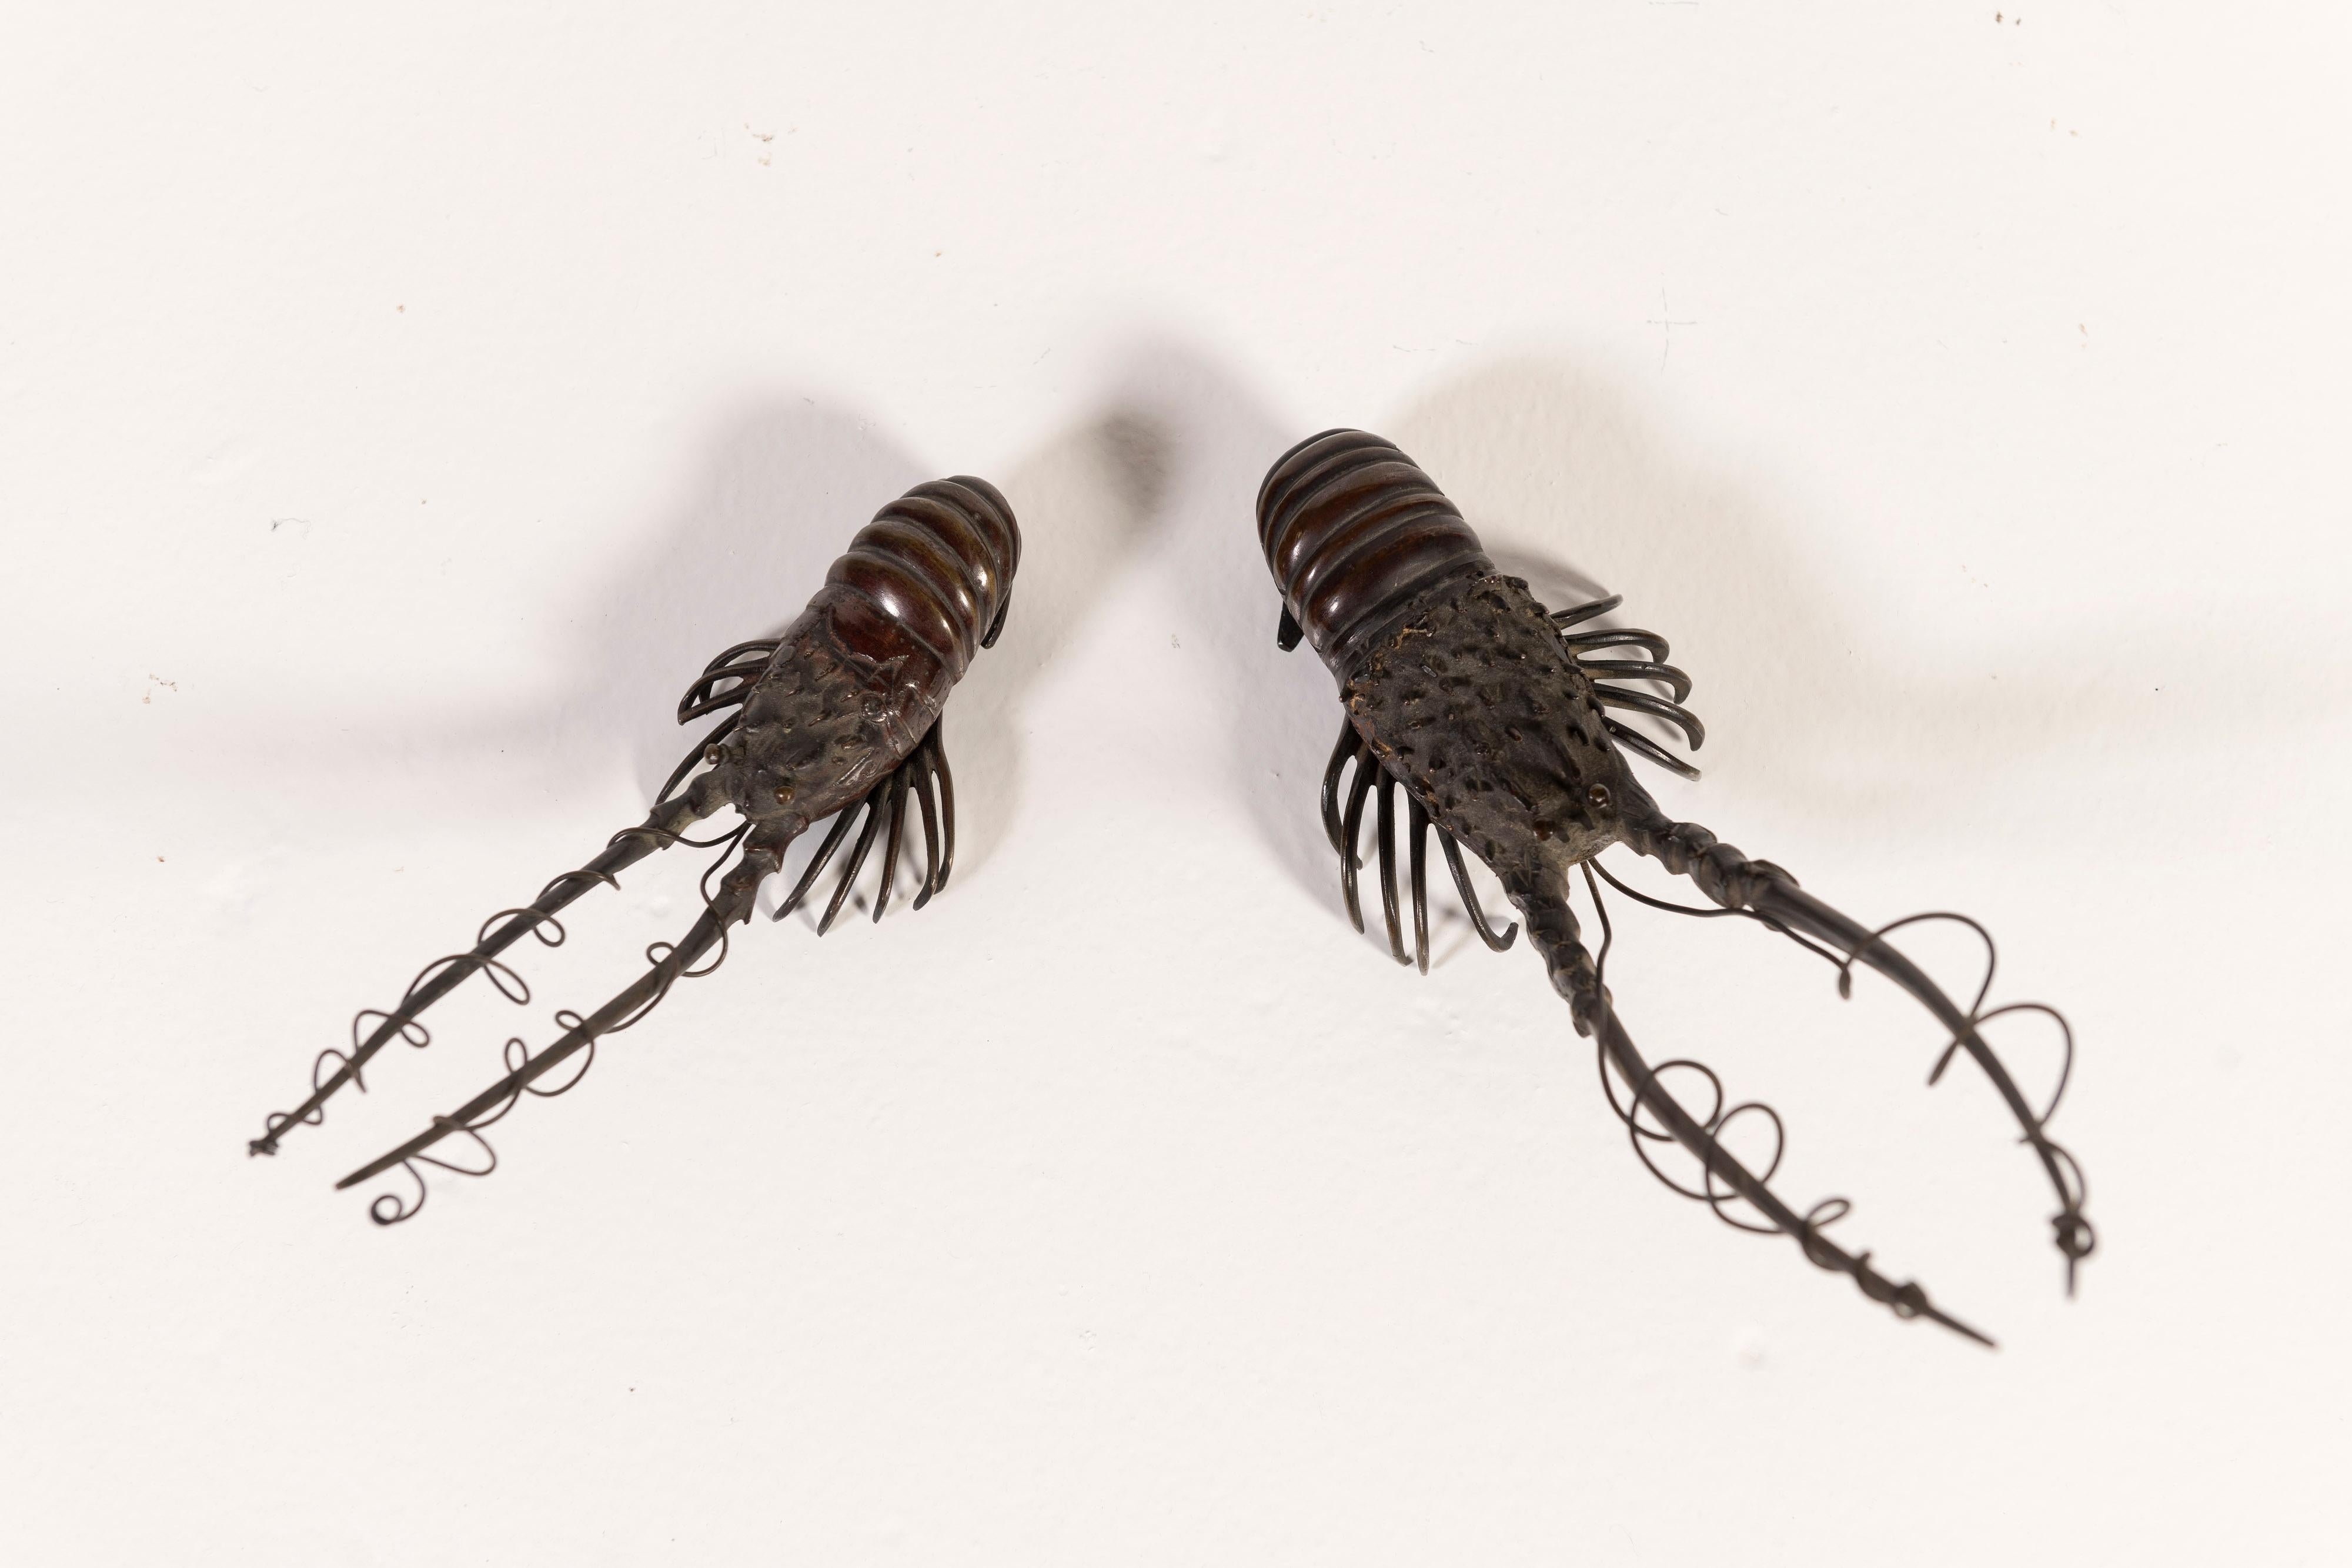 Meiji Two Unique 19th Century Bronze Lobster Sculptures, Sold as Pair, of Japan